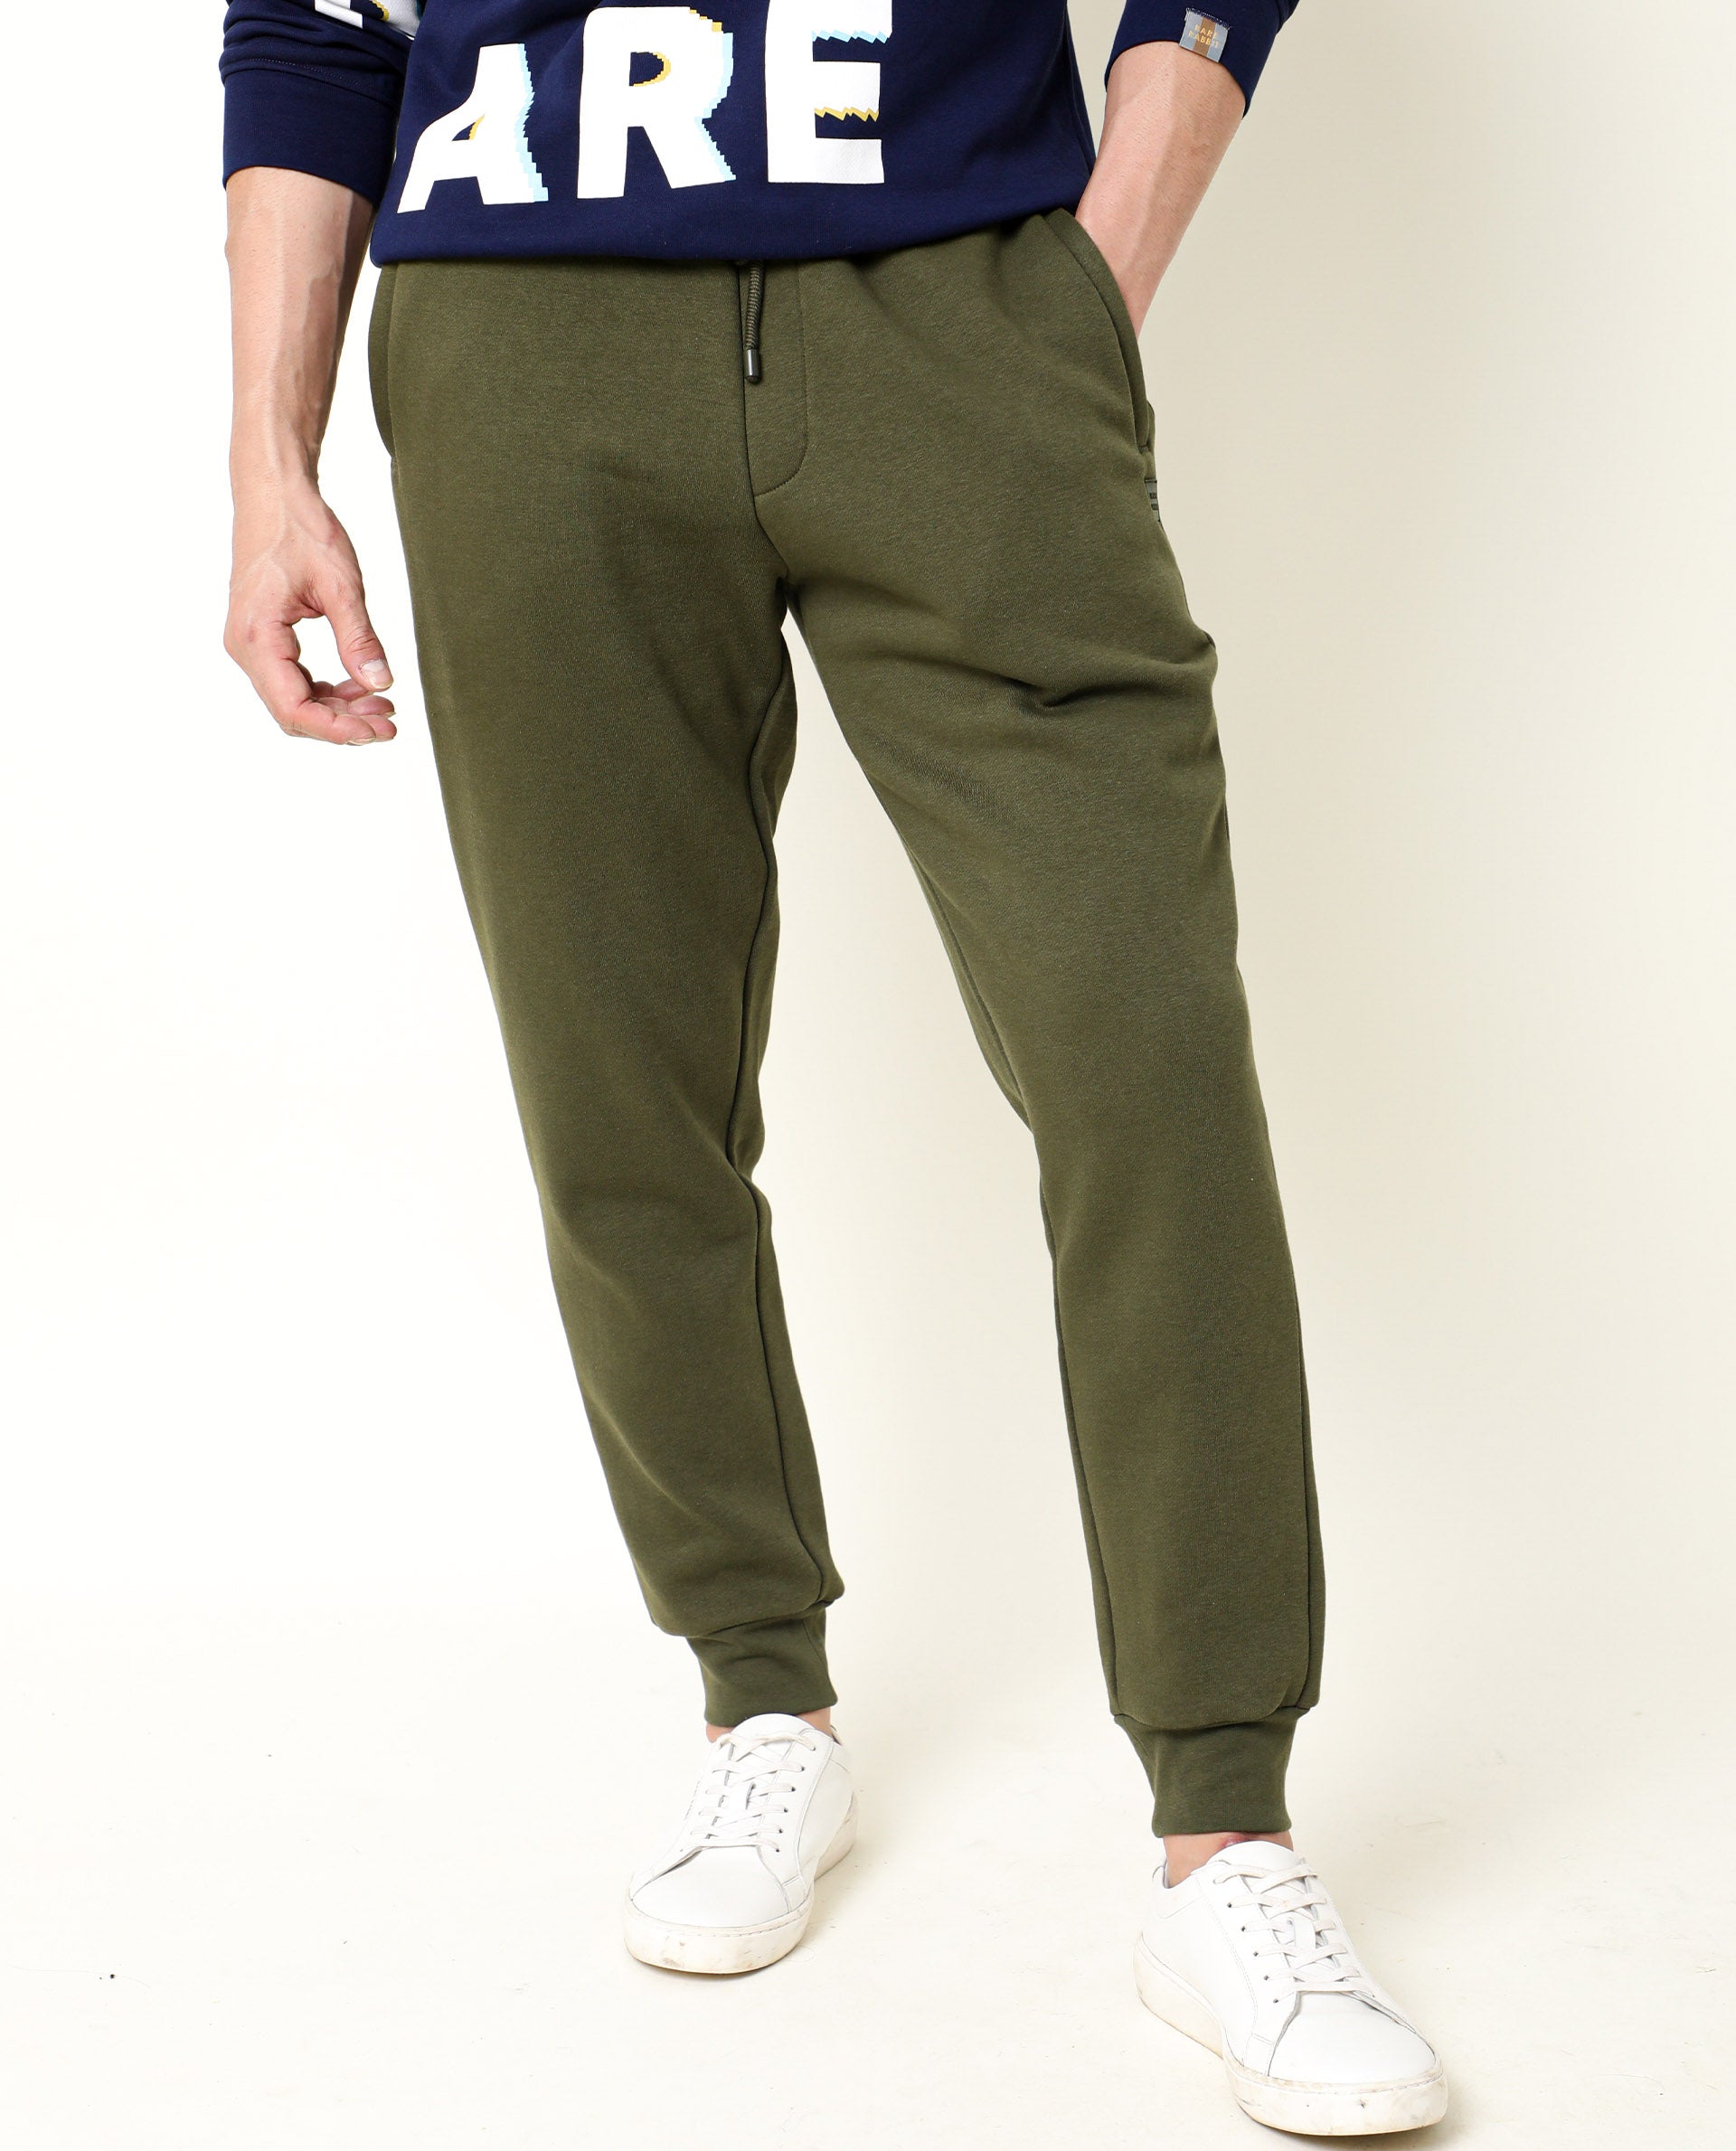 South Beach slim fit polyester sweatpants in navy